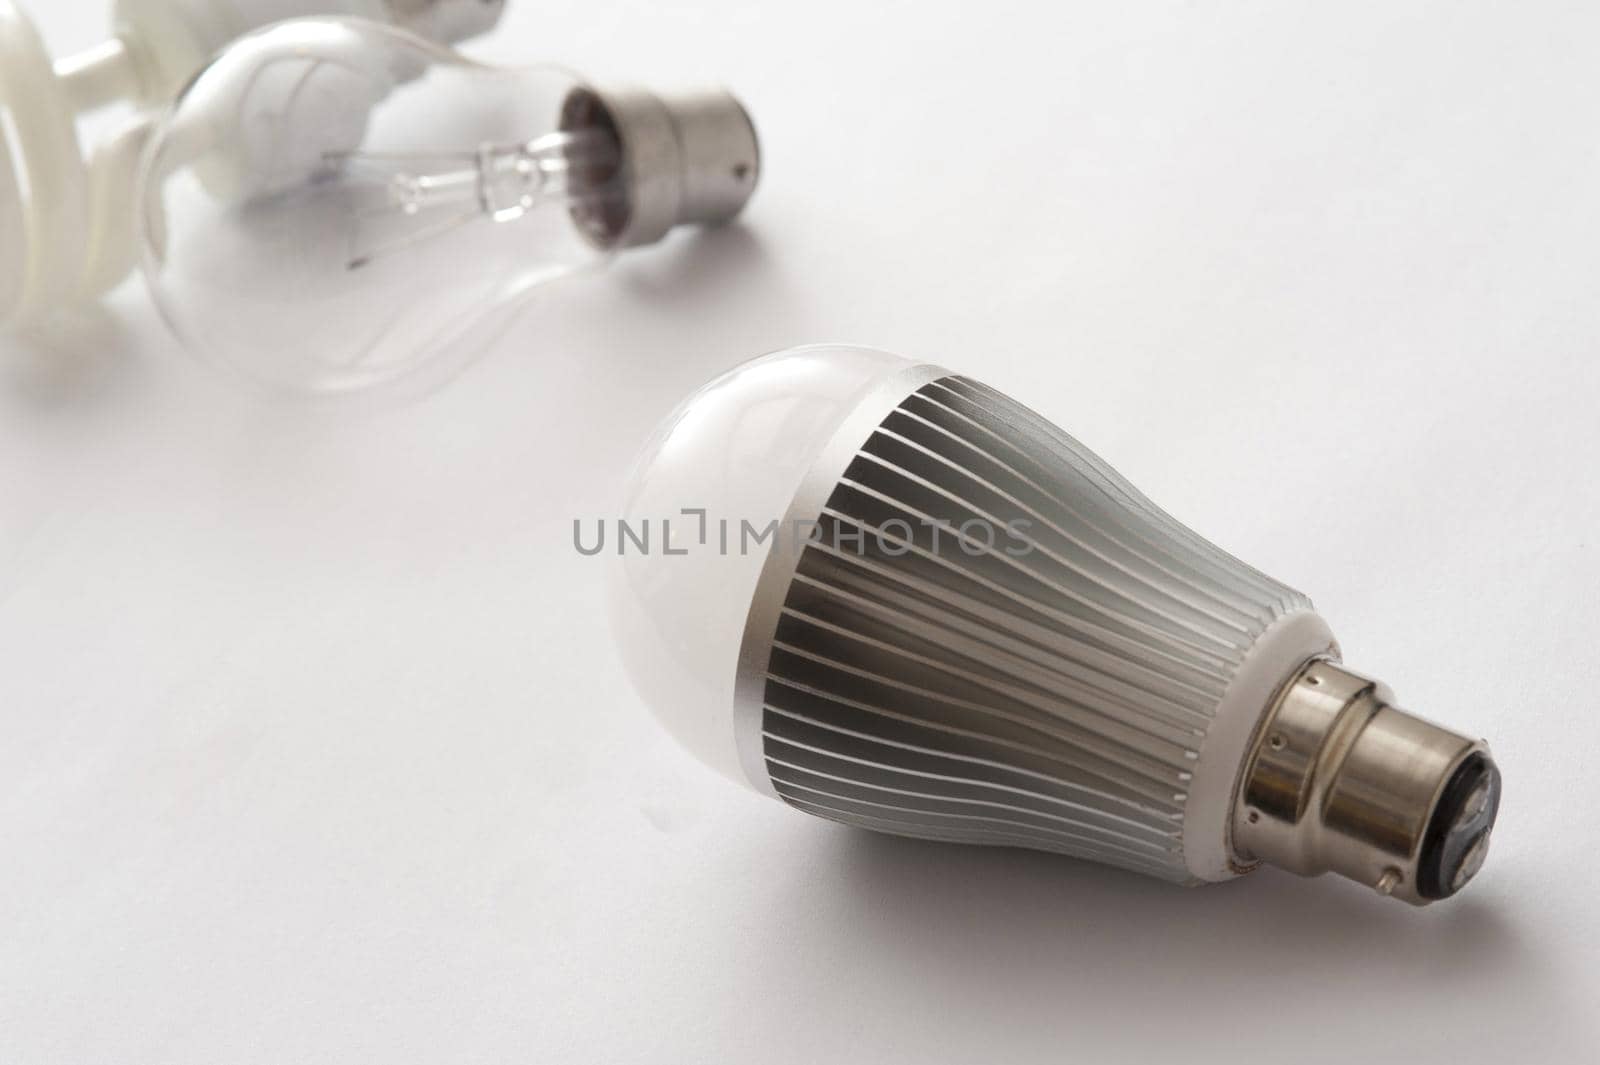 heatsink on a bayonet cap LED energy efficient light bulb, with older incandescent lamp and CF lamp in the background